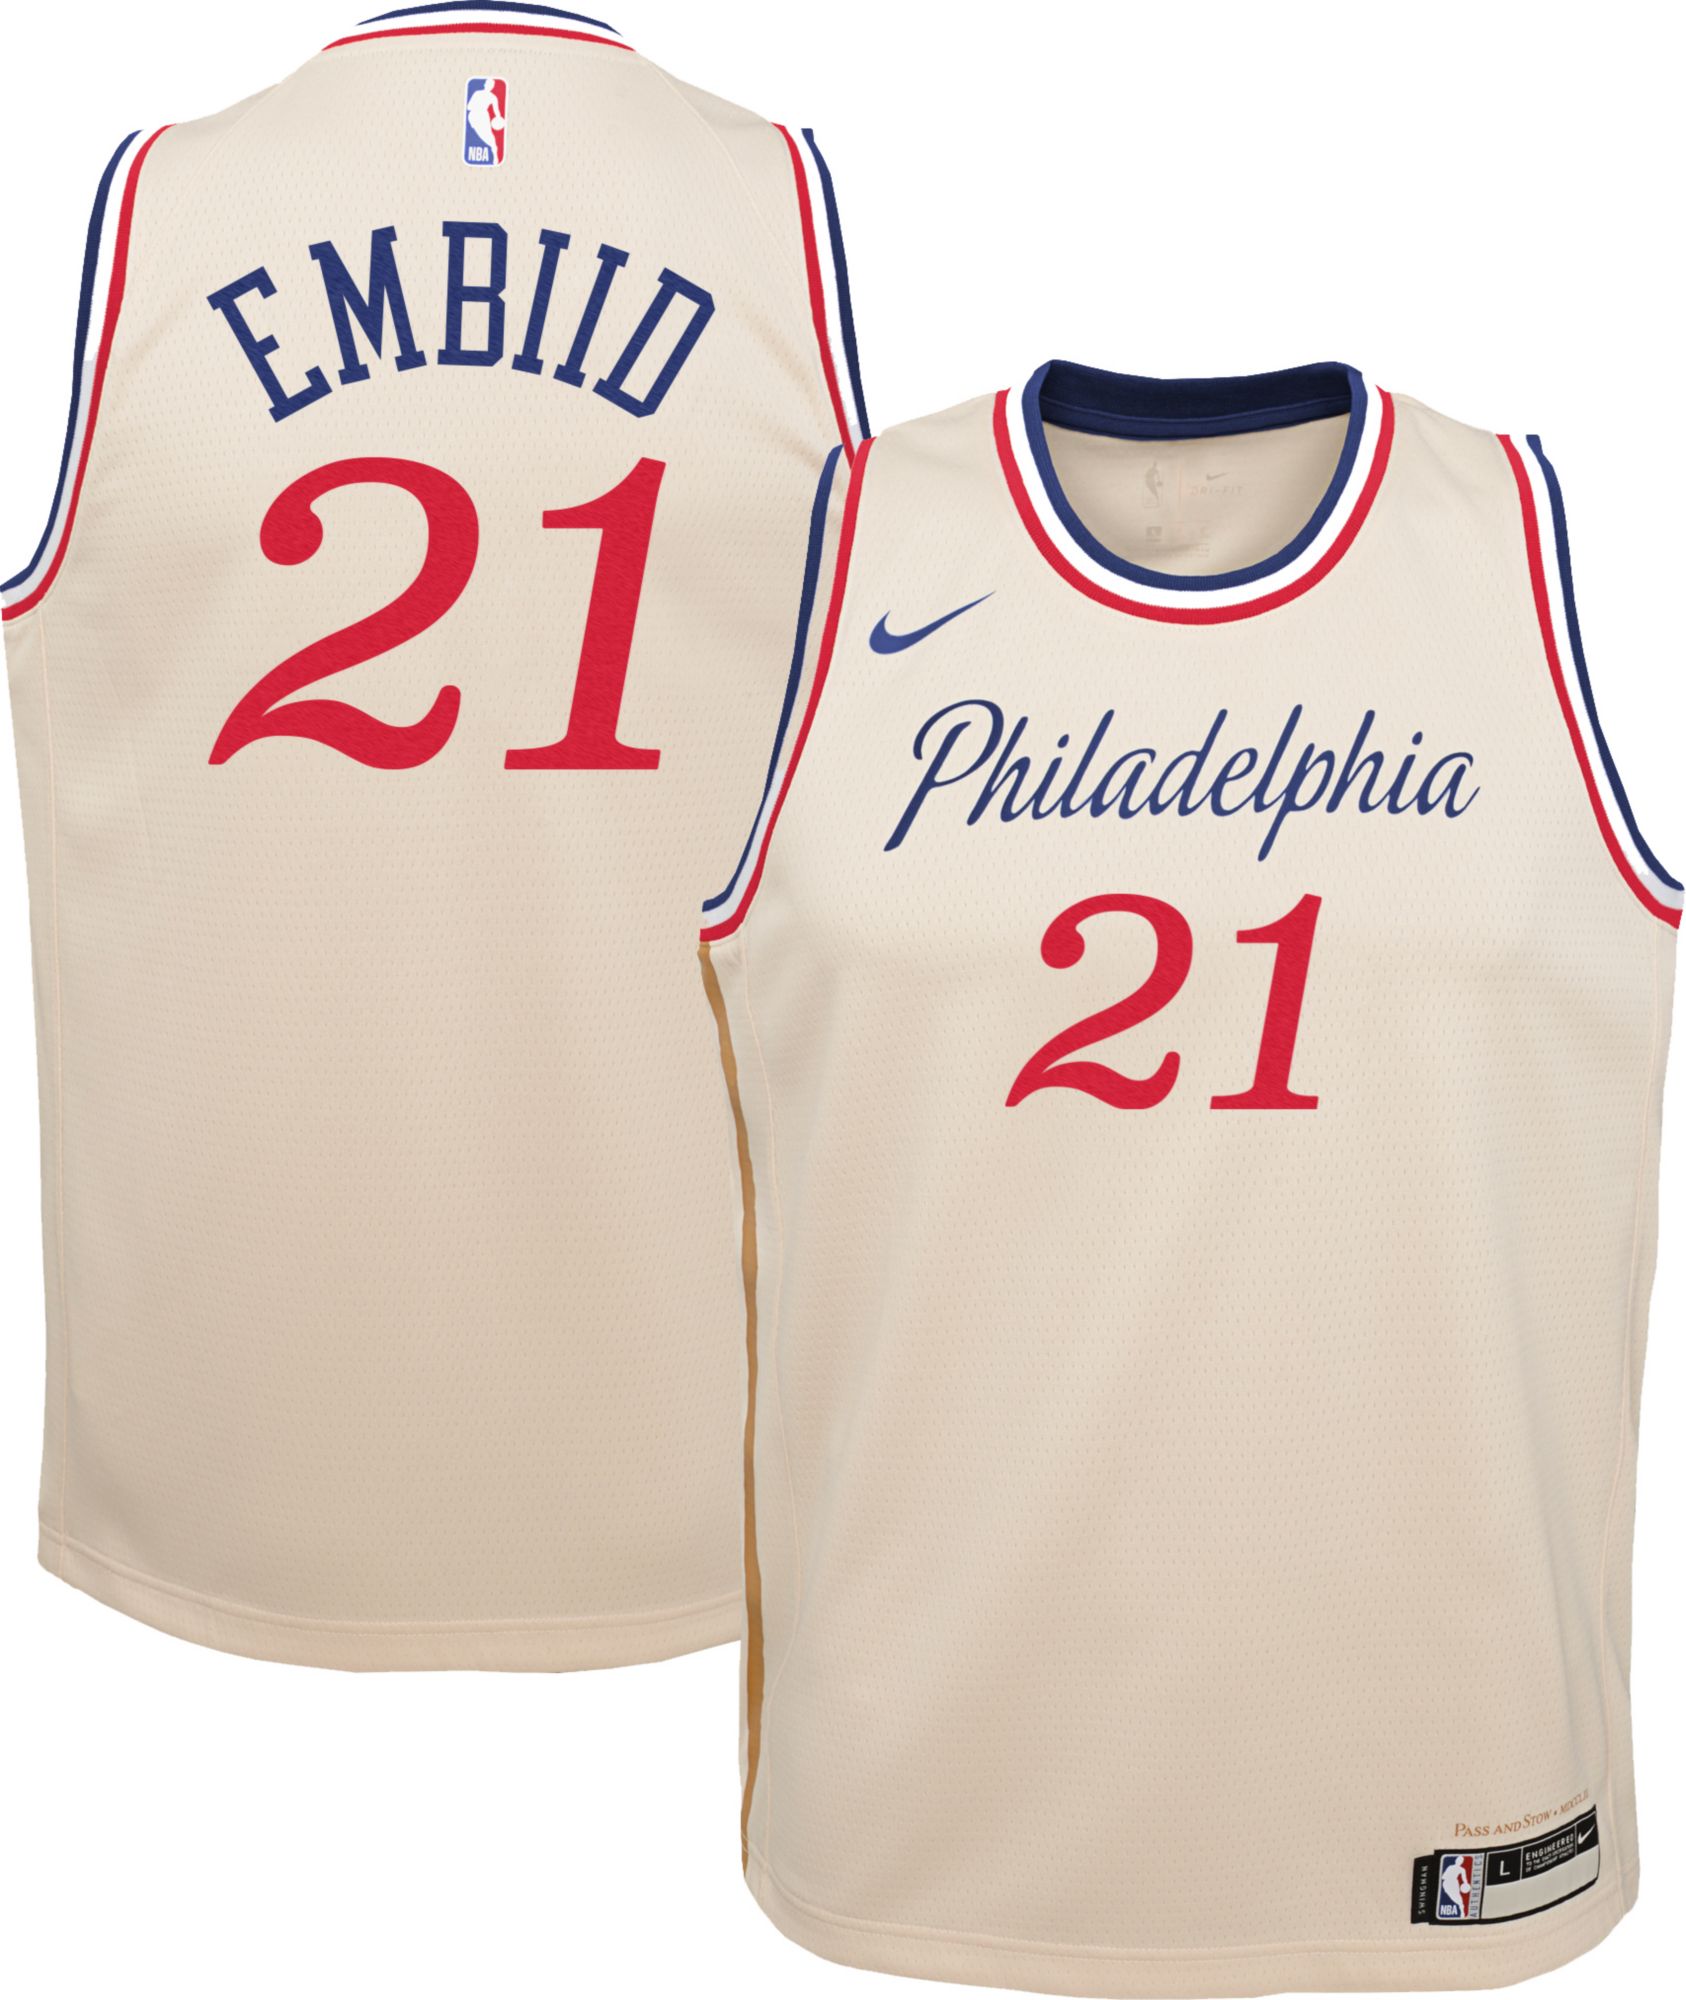 sixers 21 jersey